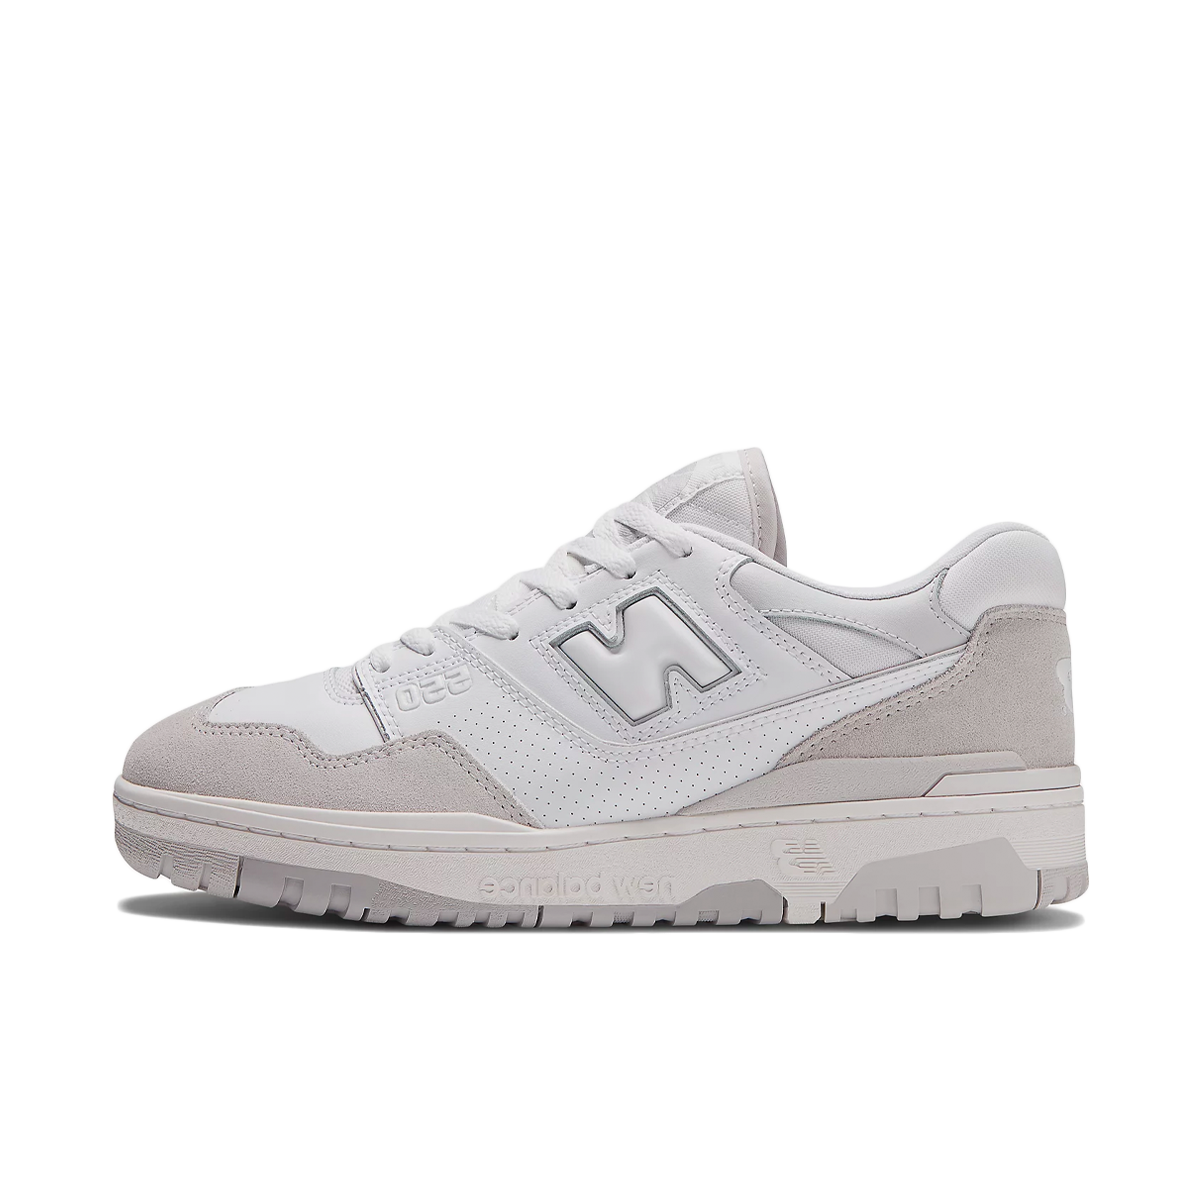 Browse New Balance 550 Sneakers | JointemsprotocolsShops